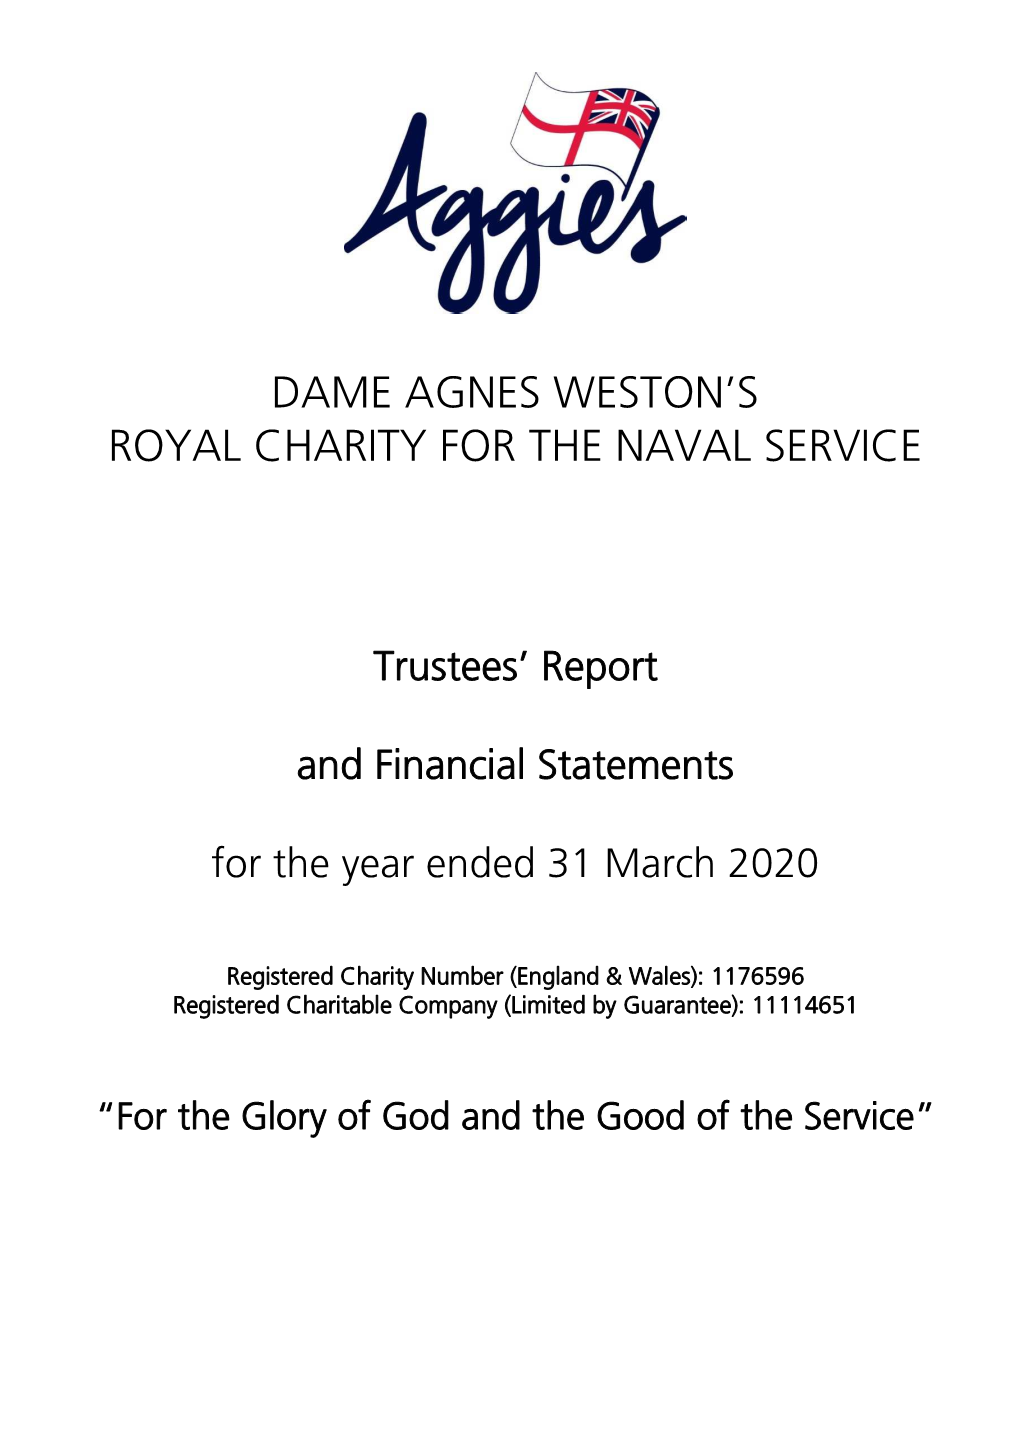 Dame Agnes Weston's Royal Charity for the Naval Service Financial Statements for the Year Ended 31 March 2020